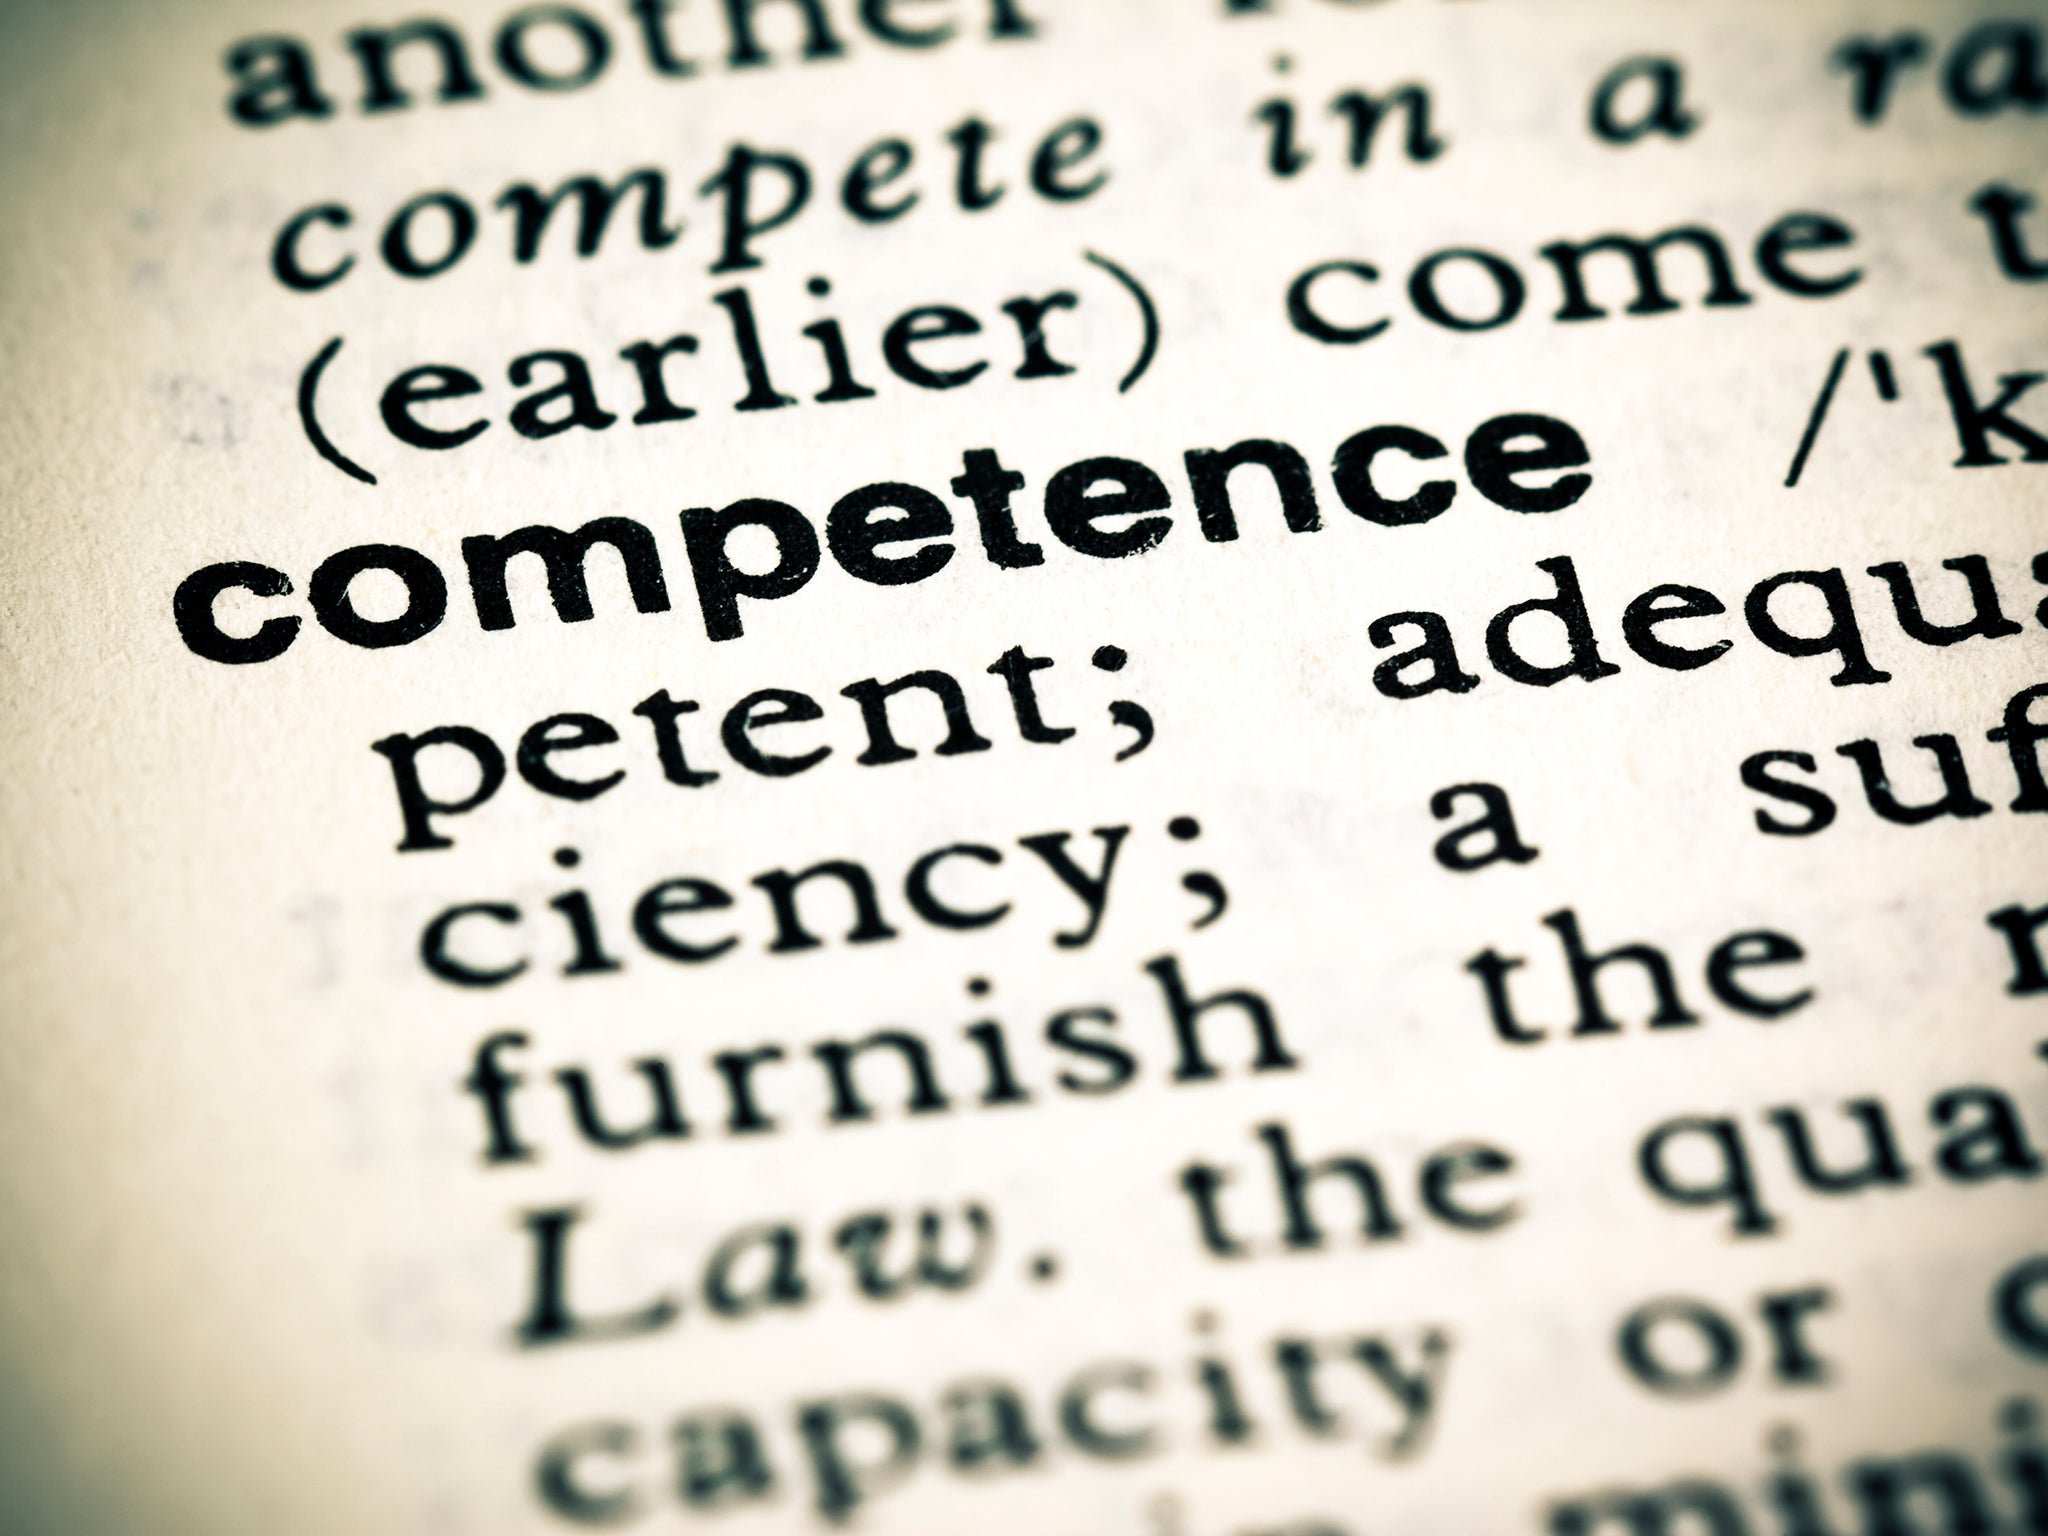 Competence or competency? Neither, it turns out